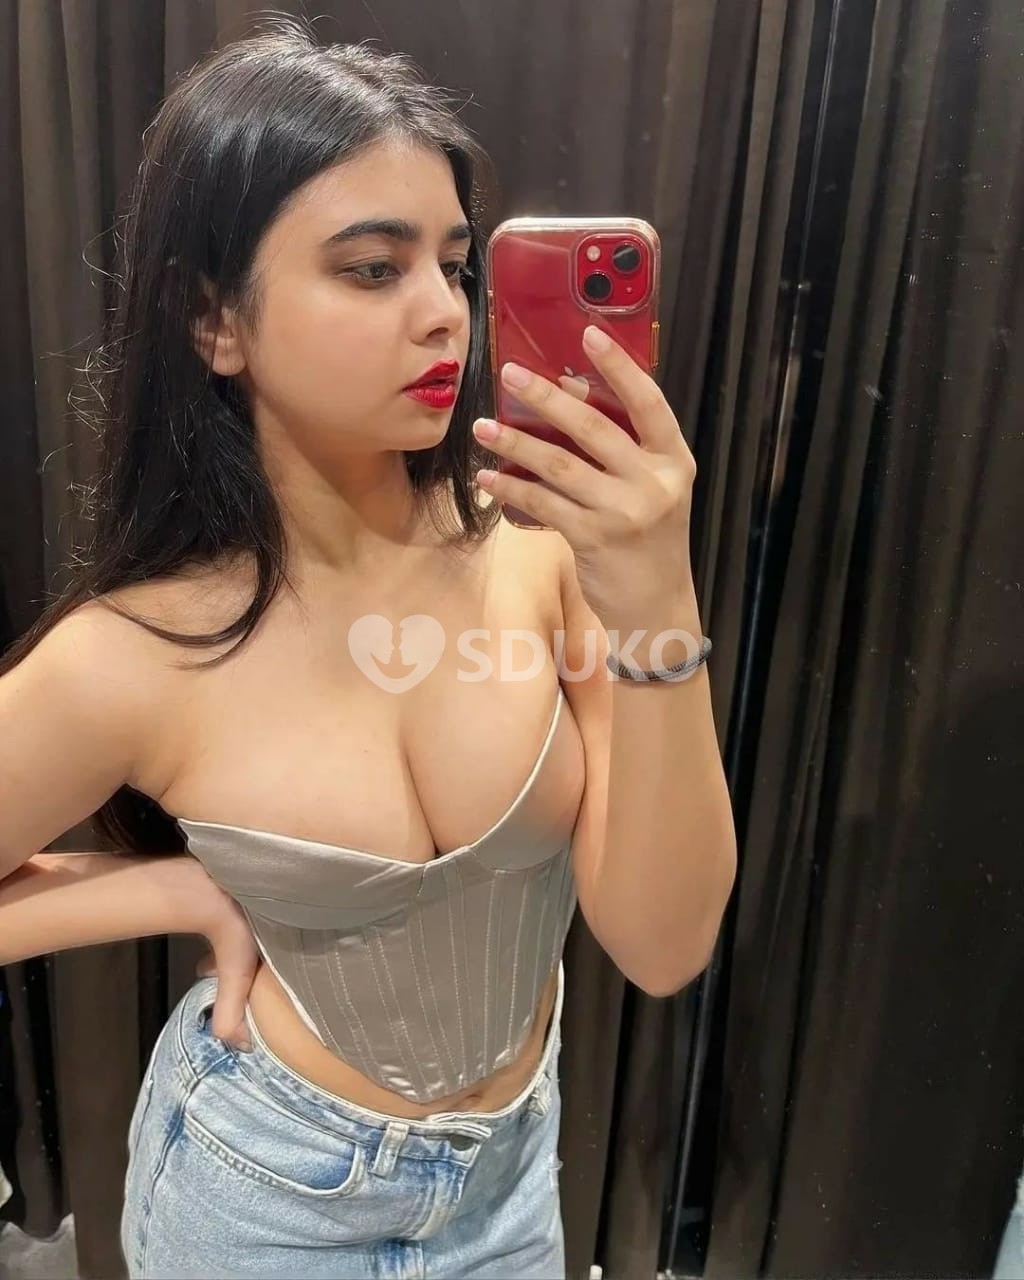 AMBALA 💥 ESCORT INDEPENDENT-CALL GIRLS AVAILABLE WITH PLACE CHEAP RATE. .,,,,,,,₹+₹+₹!"